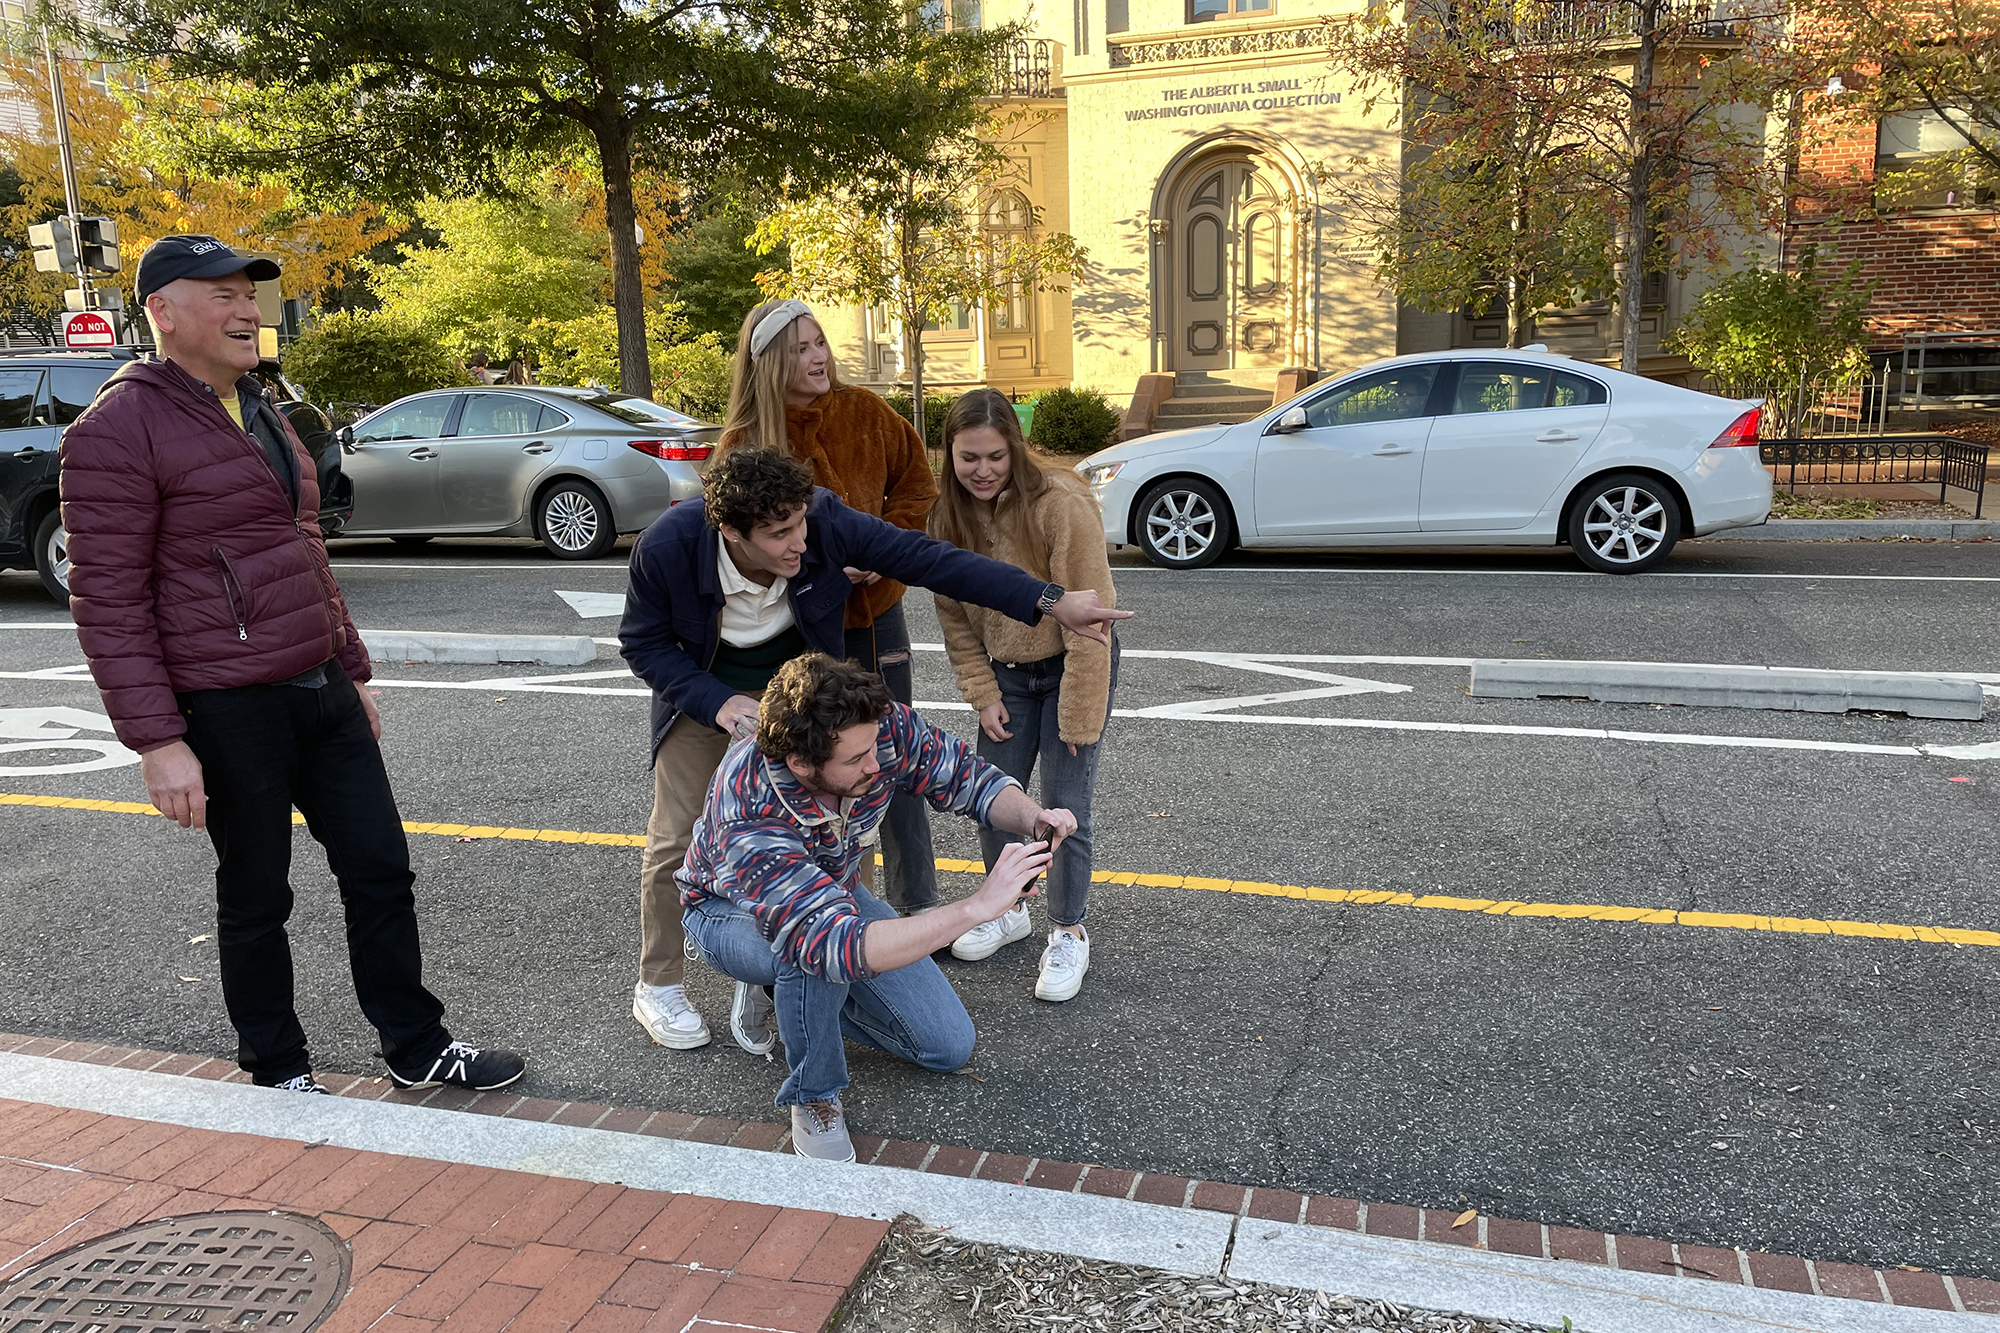 Professor Rain with students on streets of DC.